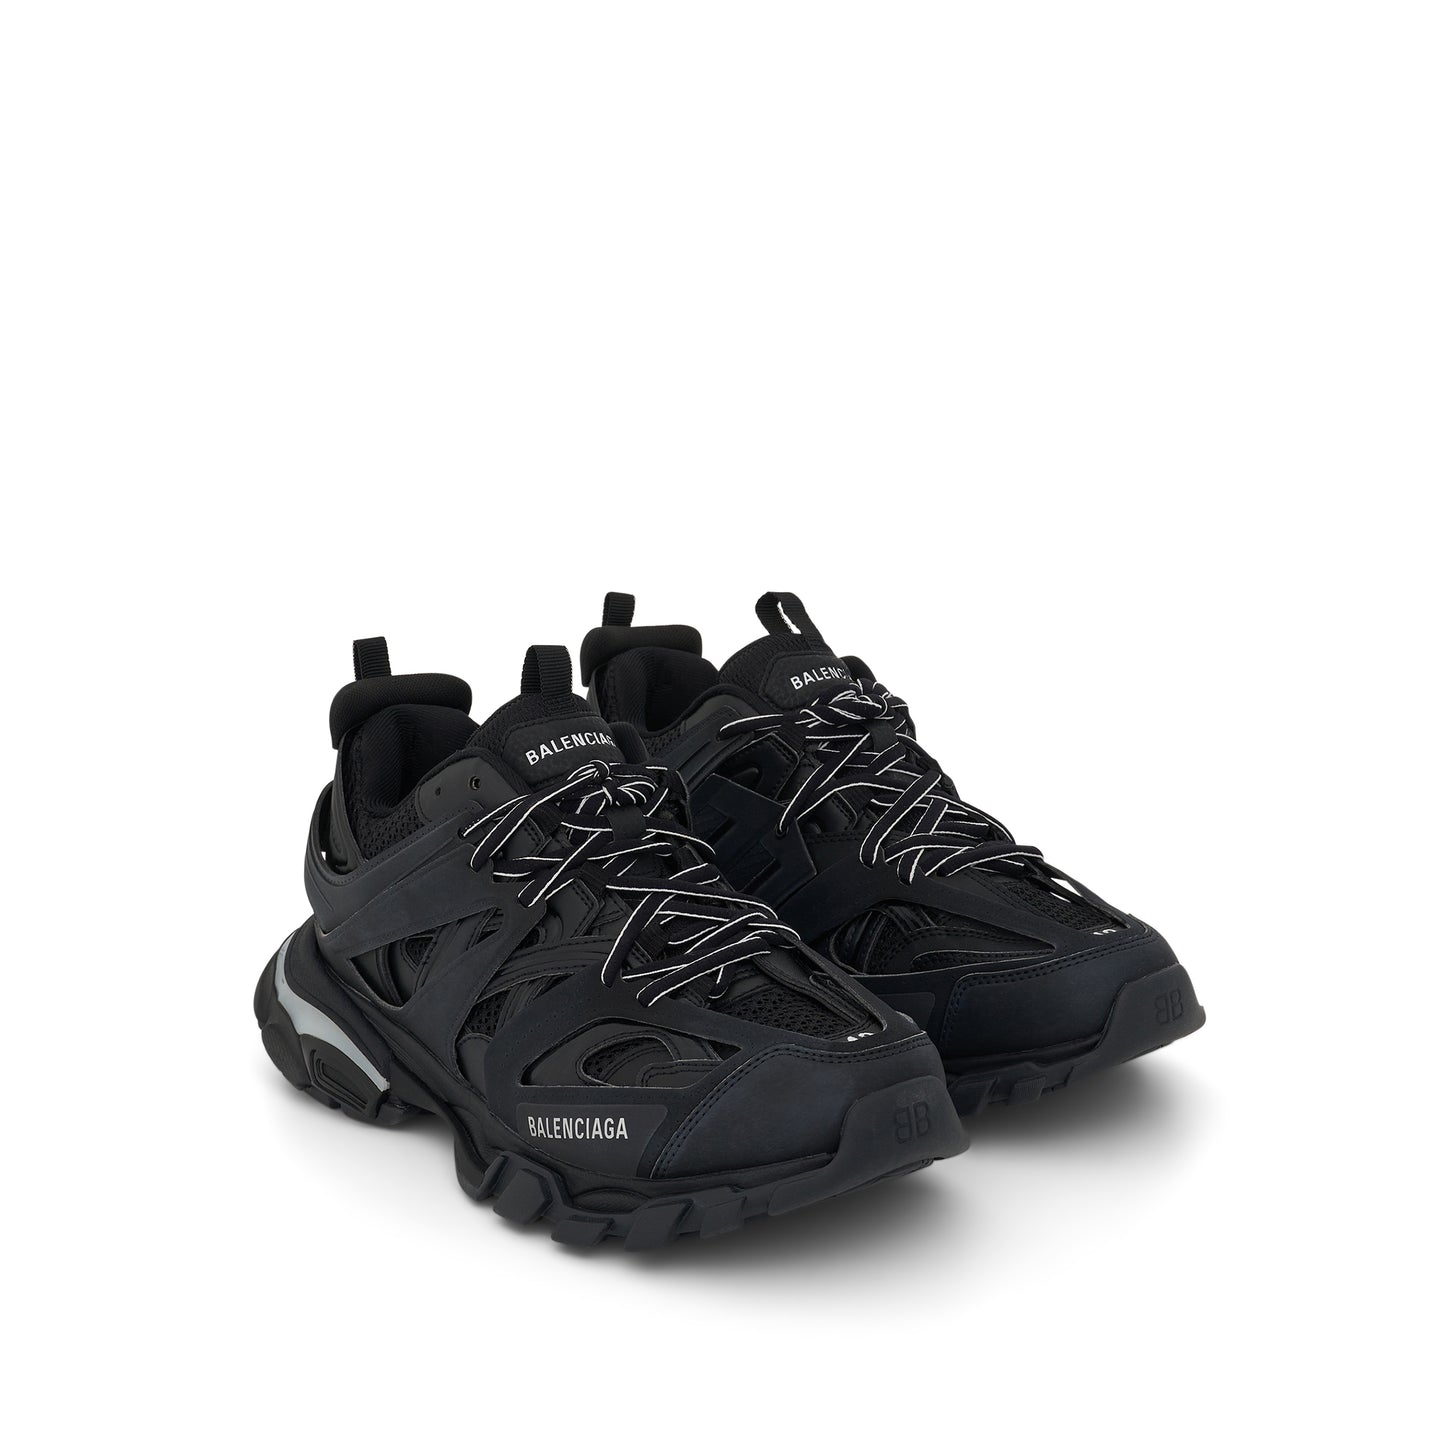 Track LED Lighted Sole Sneaker in Black